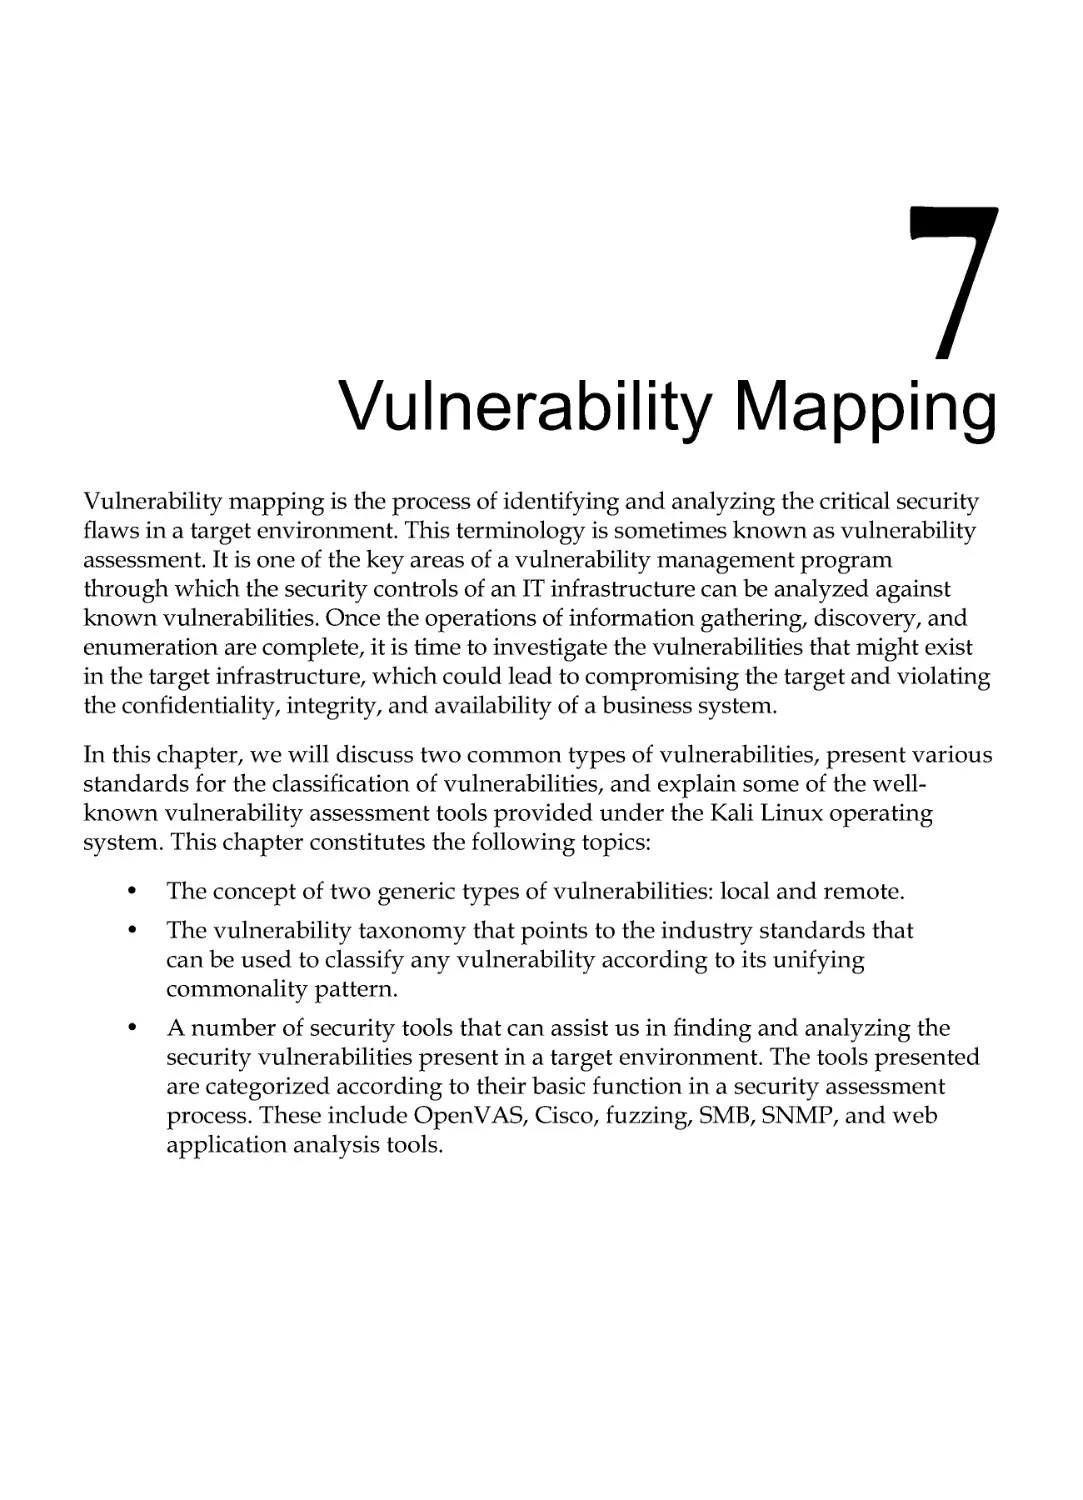 Chapter 7: Vulnerability Mapping